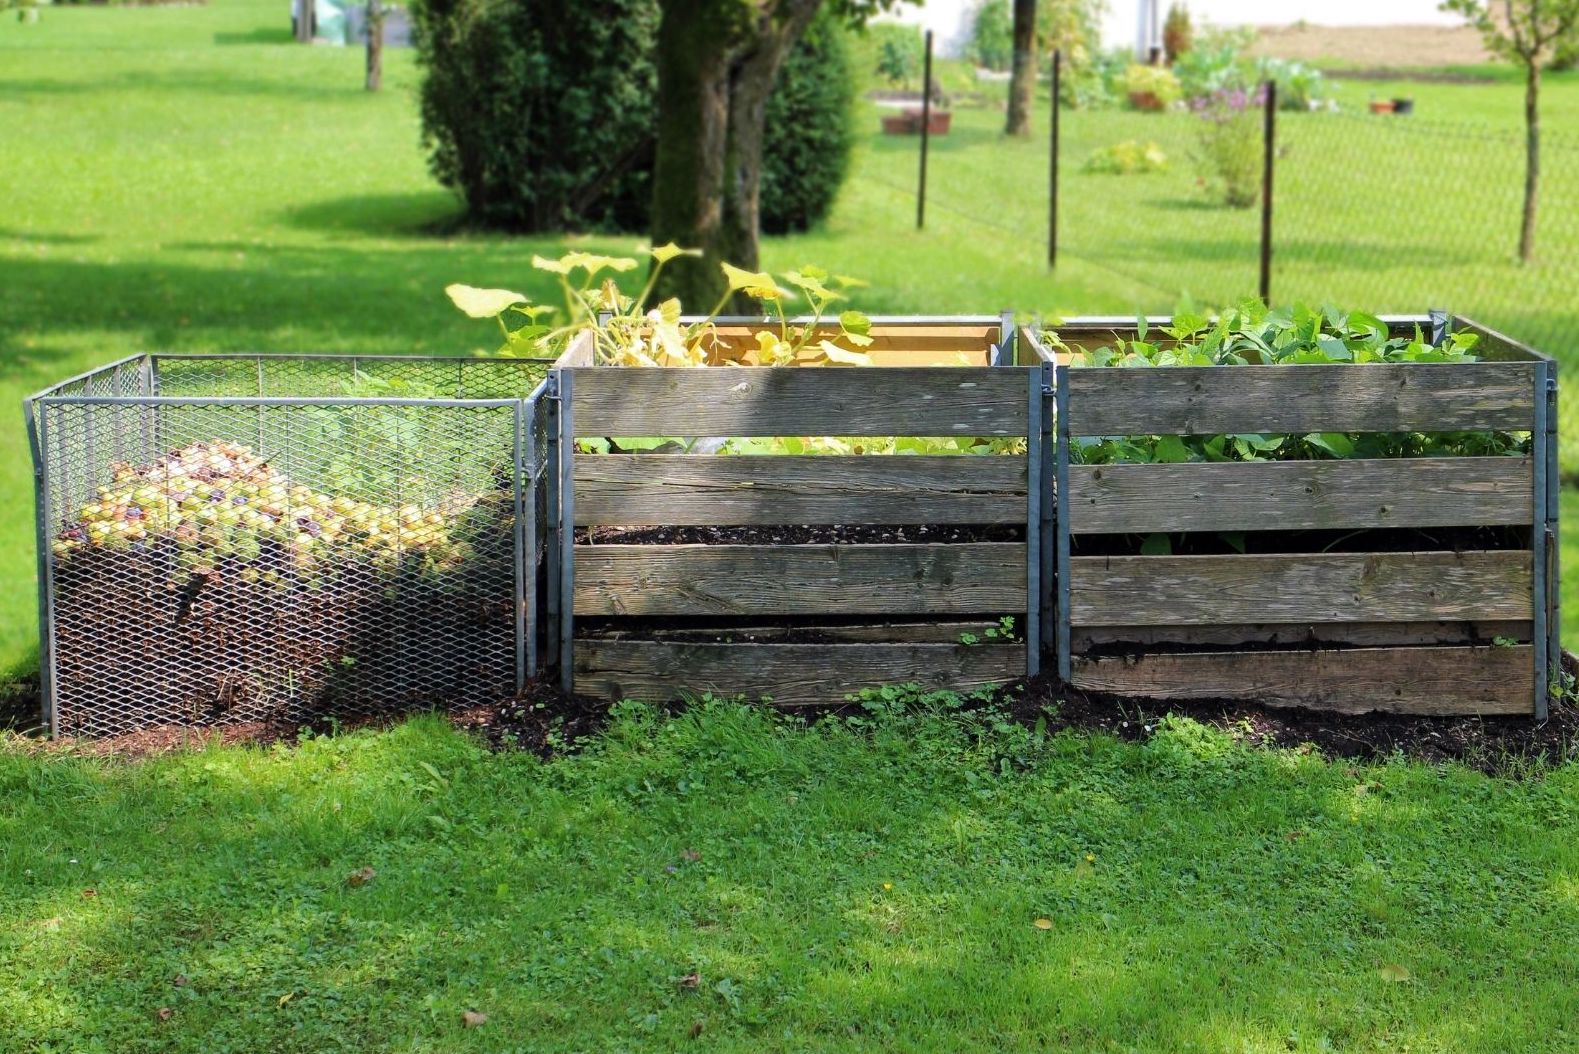 DIY! 5 Simple Steps to Build your own Compost Bin from Pallets.